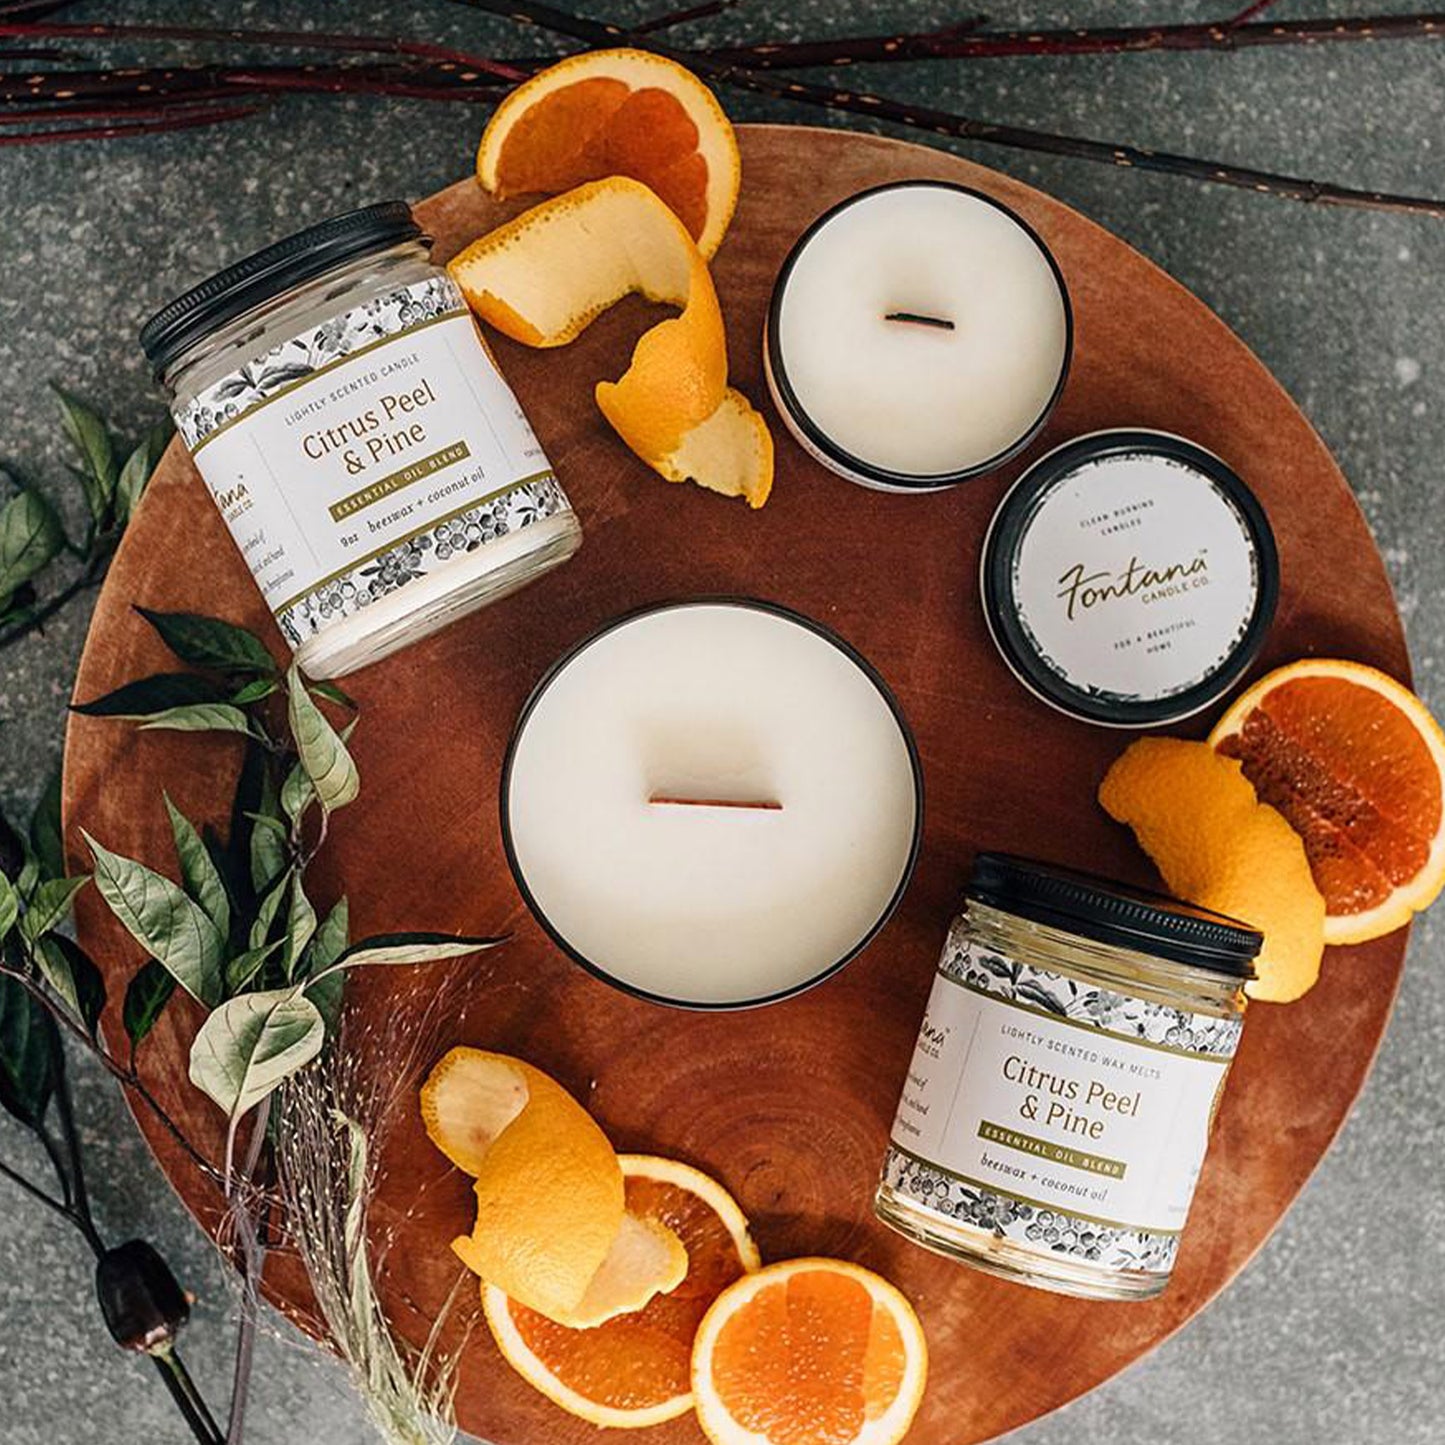 Citrus Peel and Pine Candle